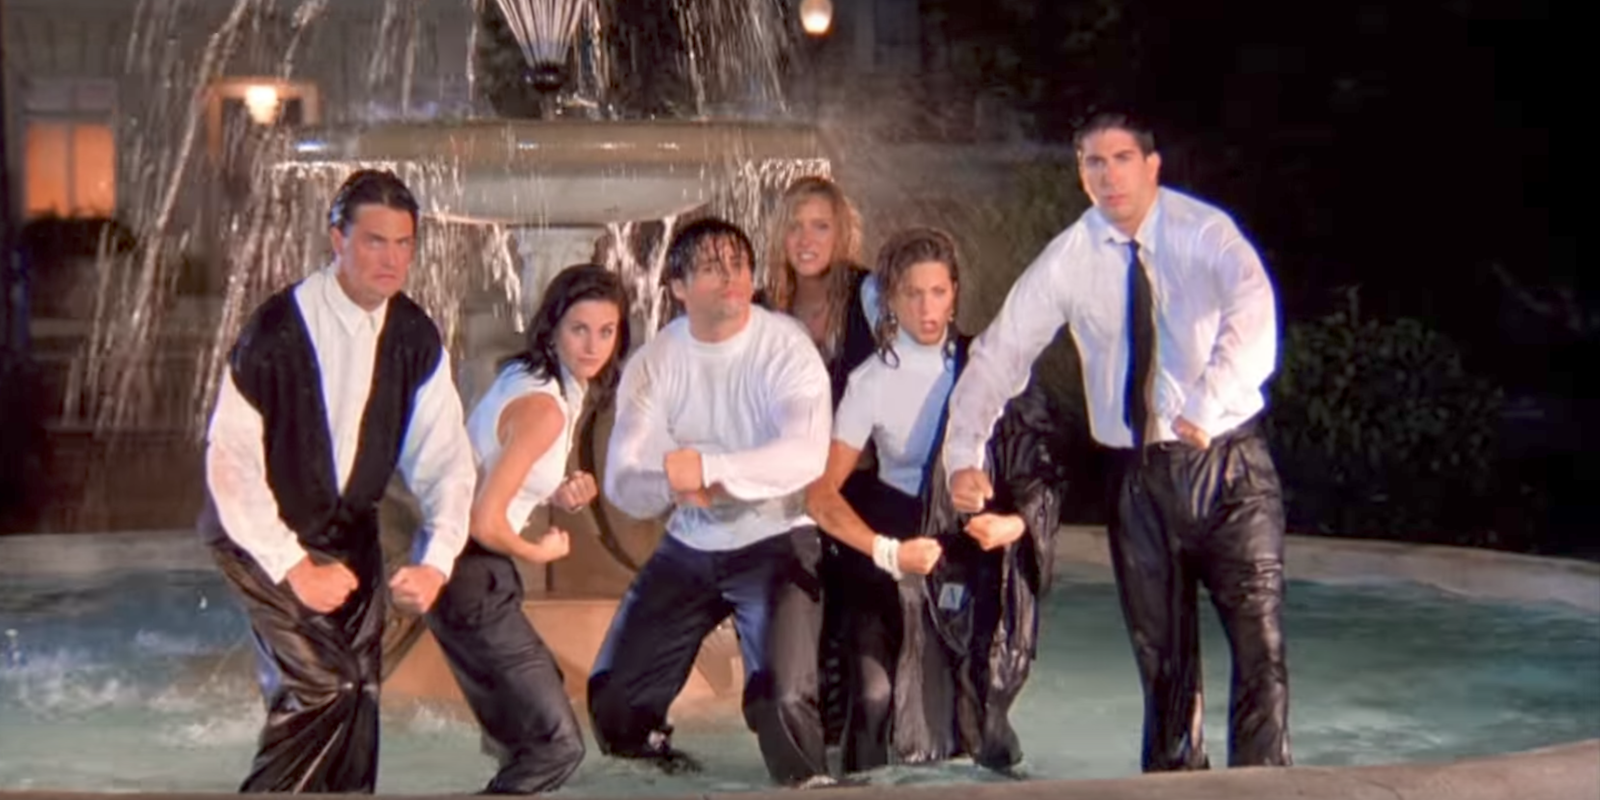 ‘Friends’ is a very different show with this rap anthem theme music